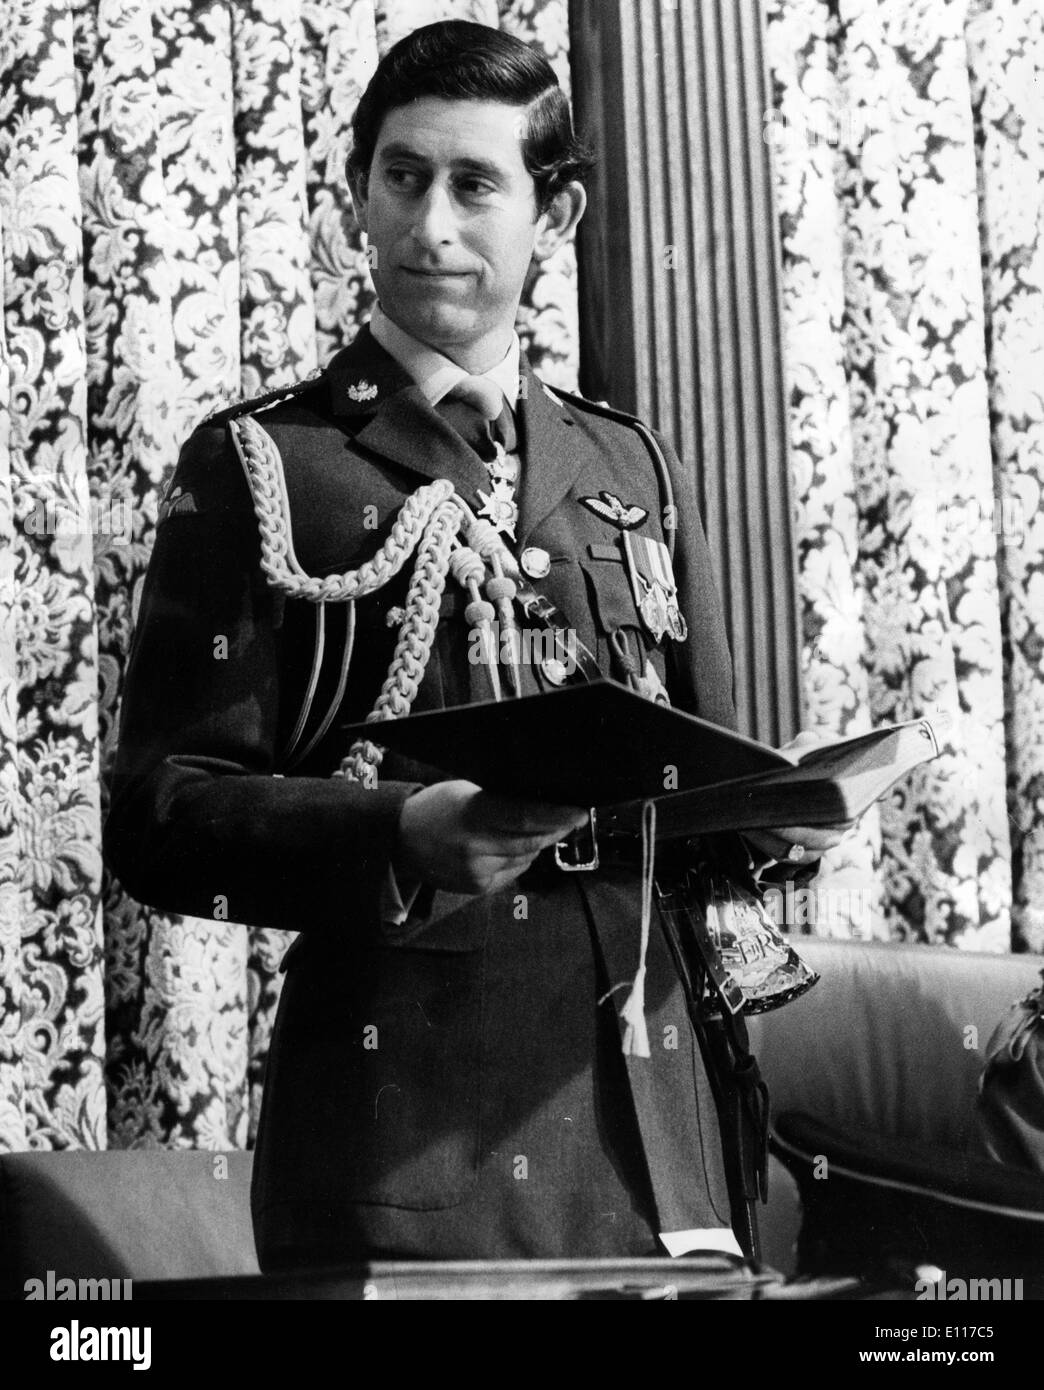 Prince Charles reads a book in uniform Stock Photo